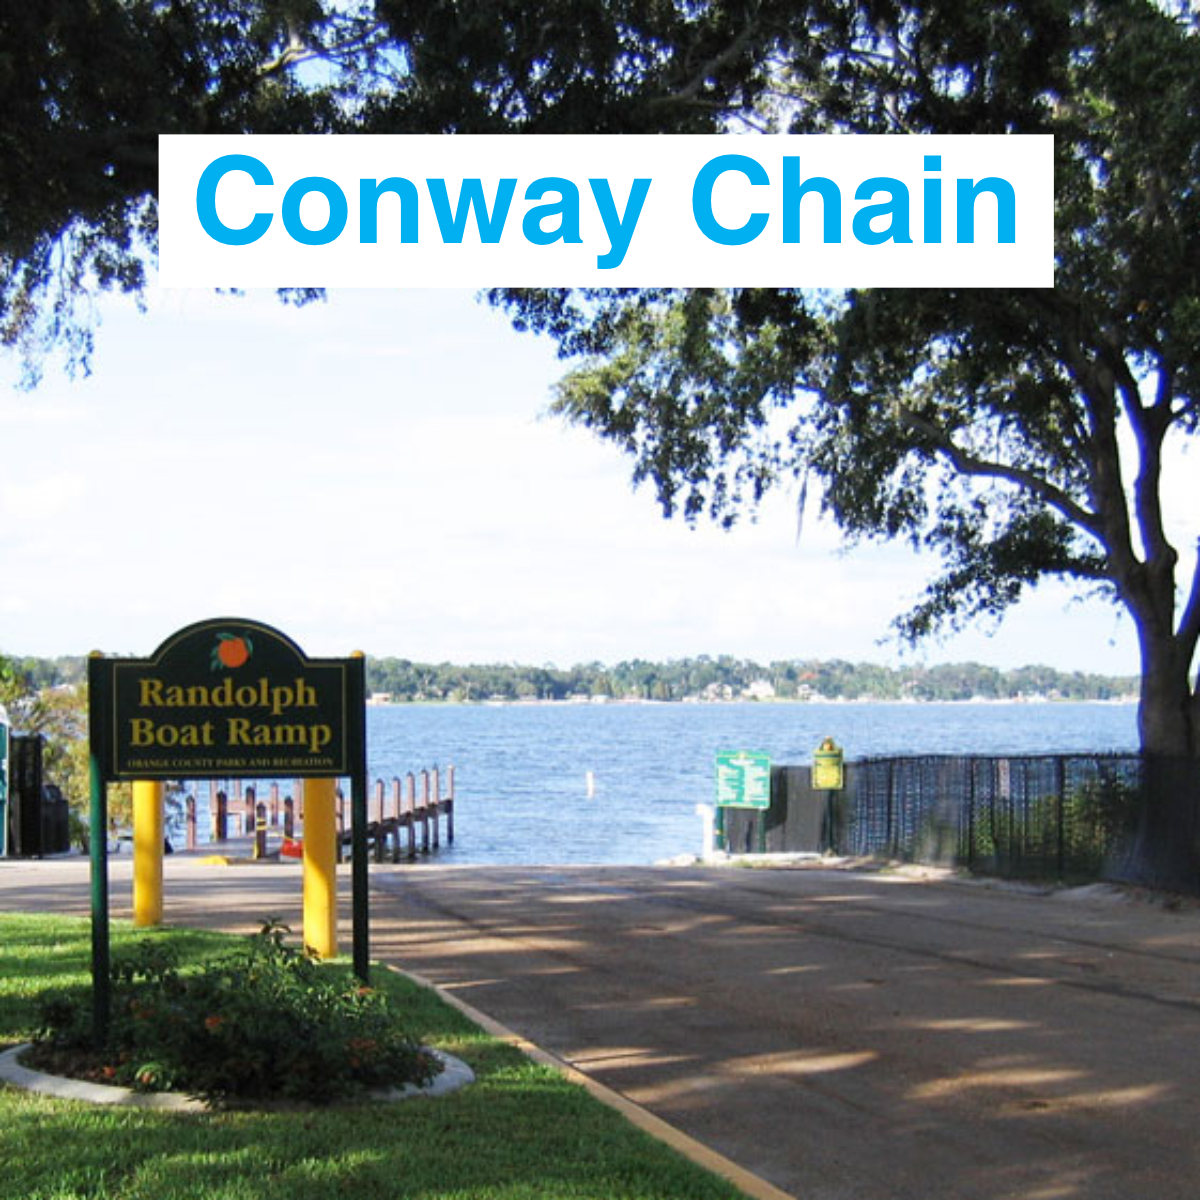 Conway Chain